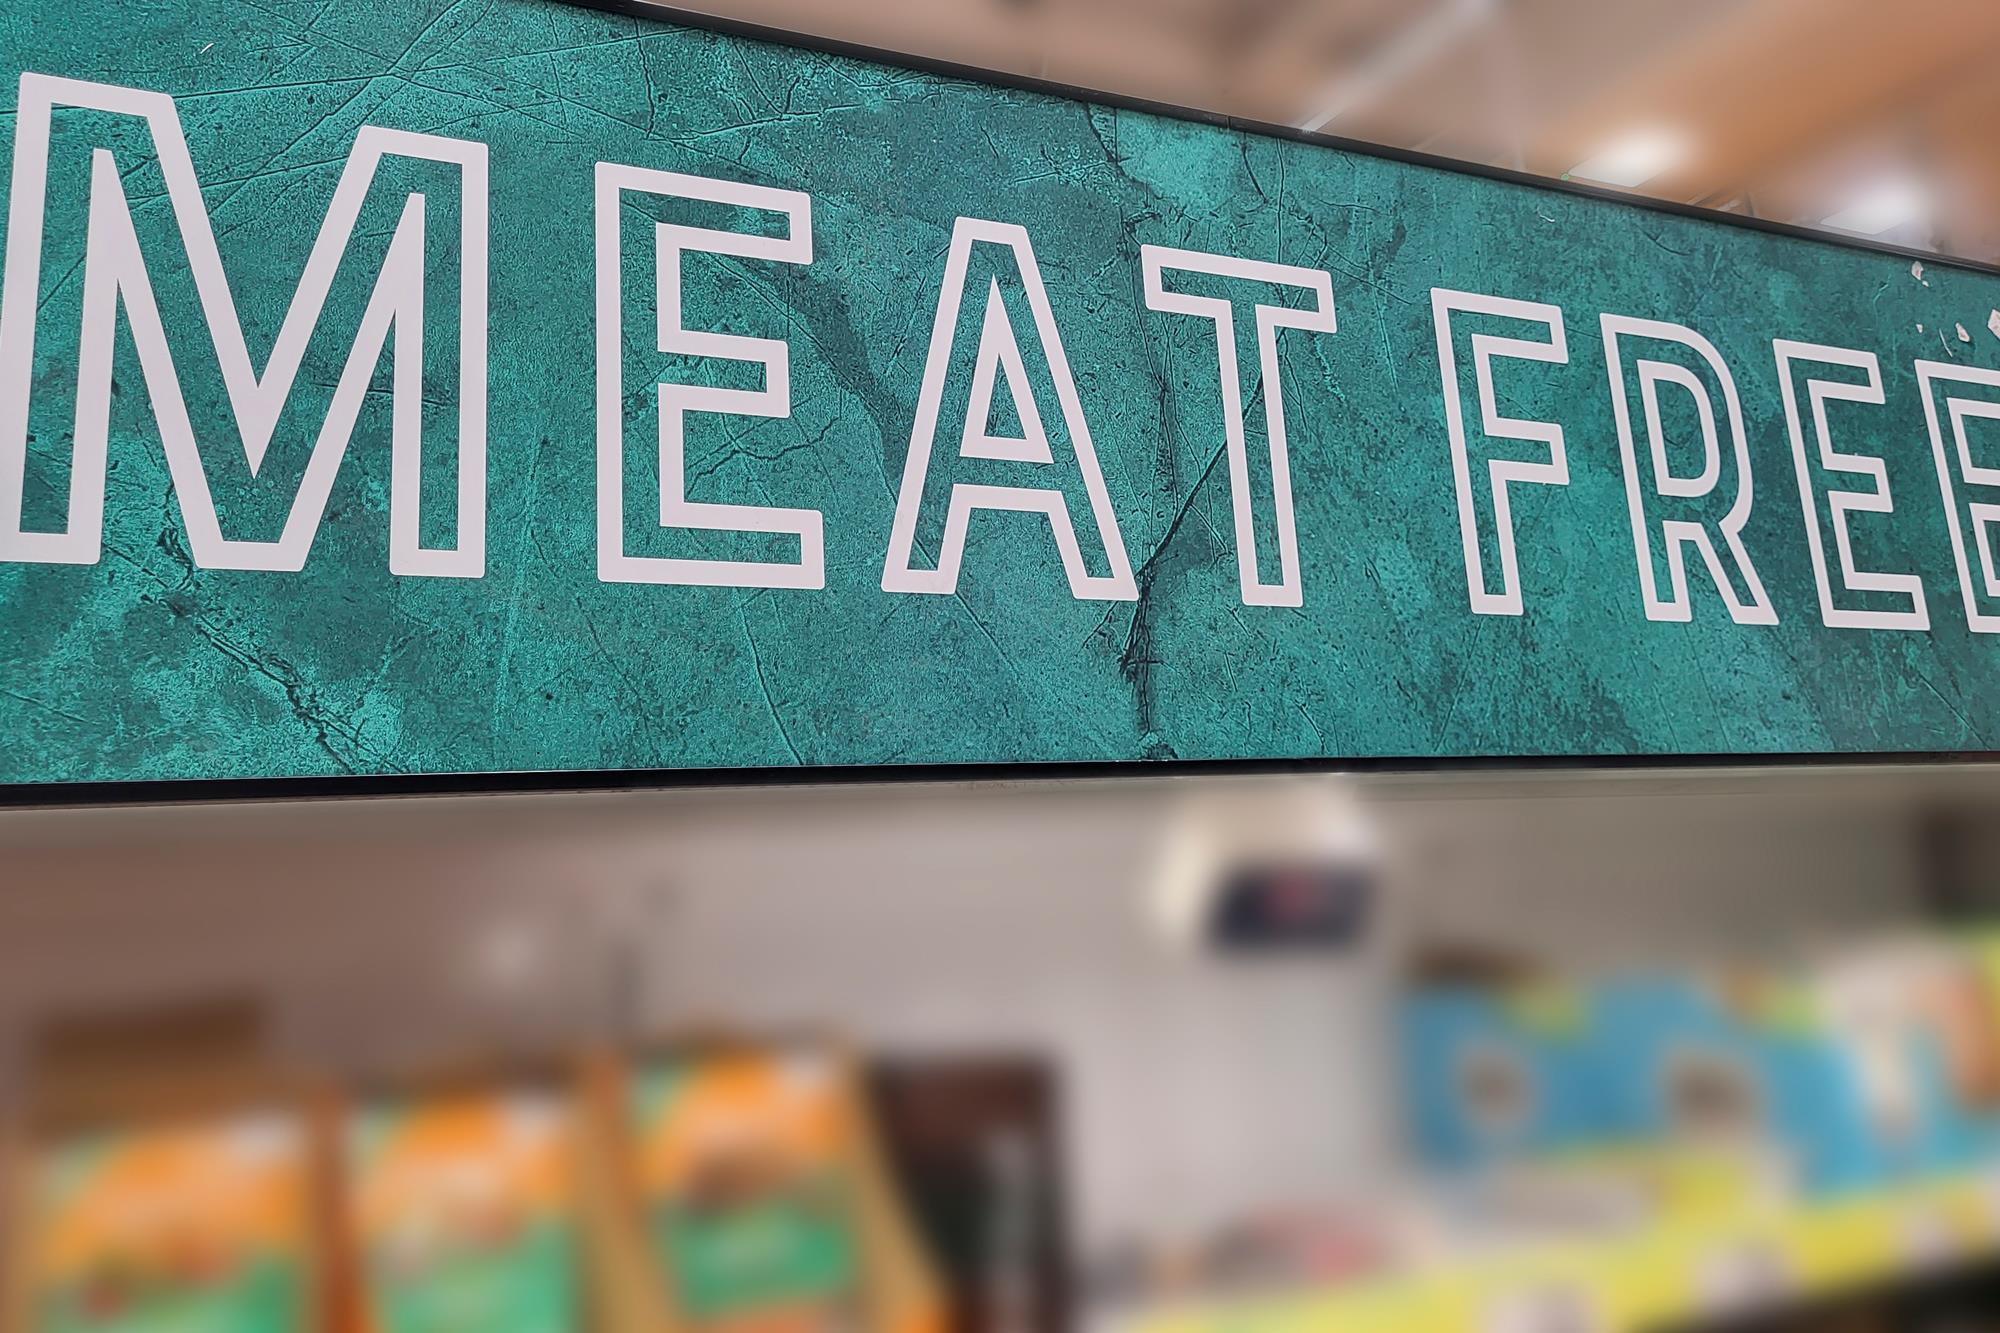 Meat Products Packaged In Butchers Paper High-Res Stock Photo - Getty Images